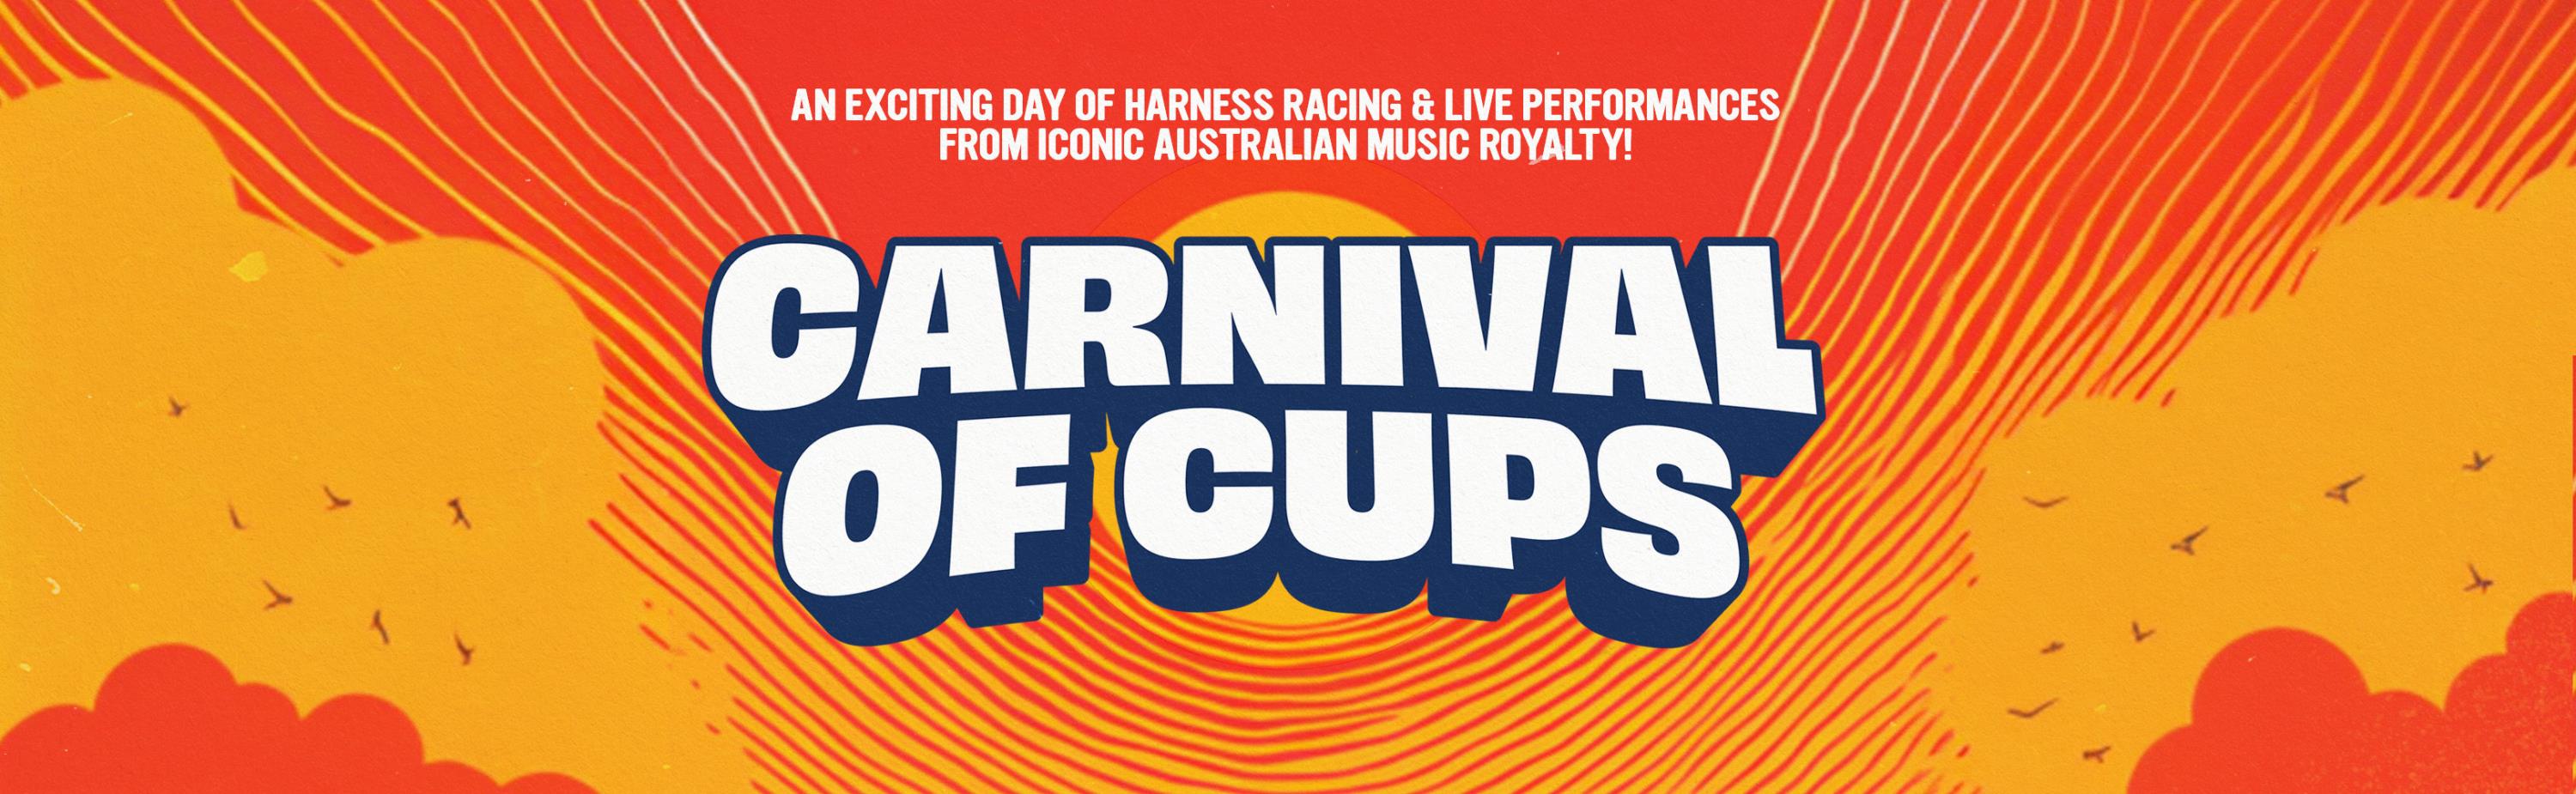 Carnival of Cups banner